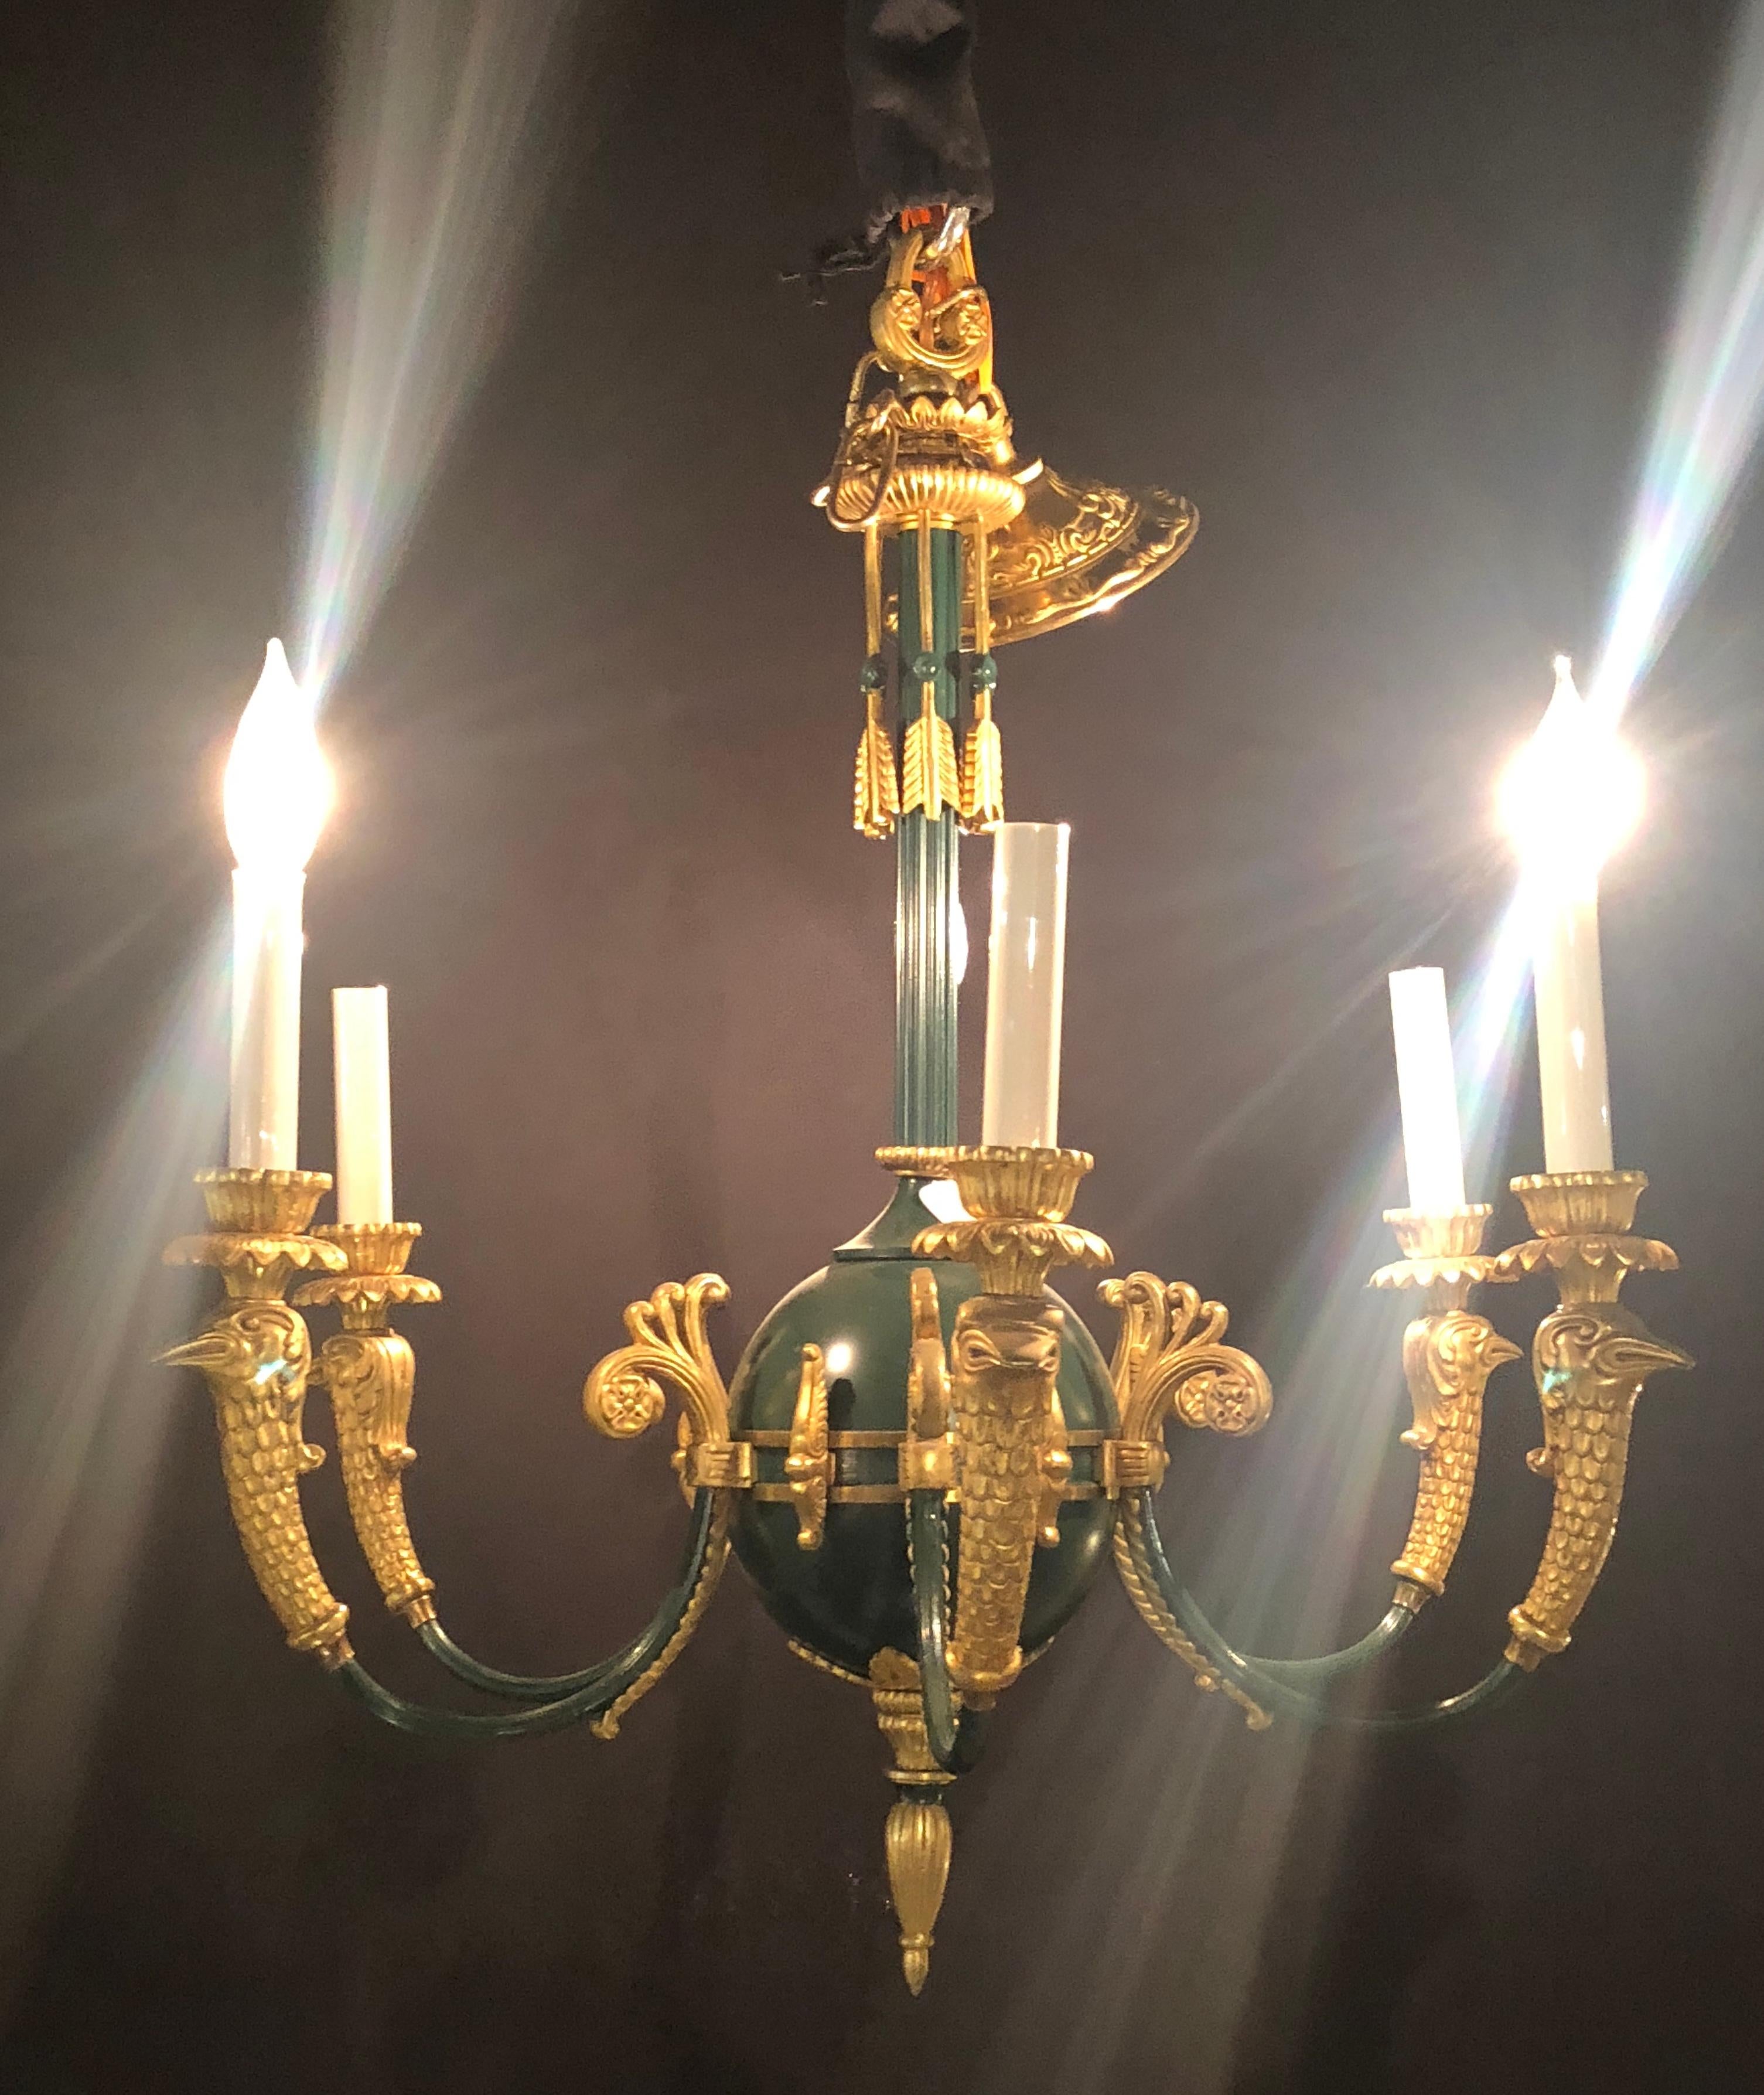 Federal Style Green Bronze Chandelier With Gilt Swan Heads. This lovely chandelier is certain to illumine any room in the home.